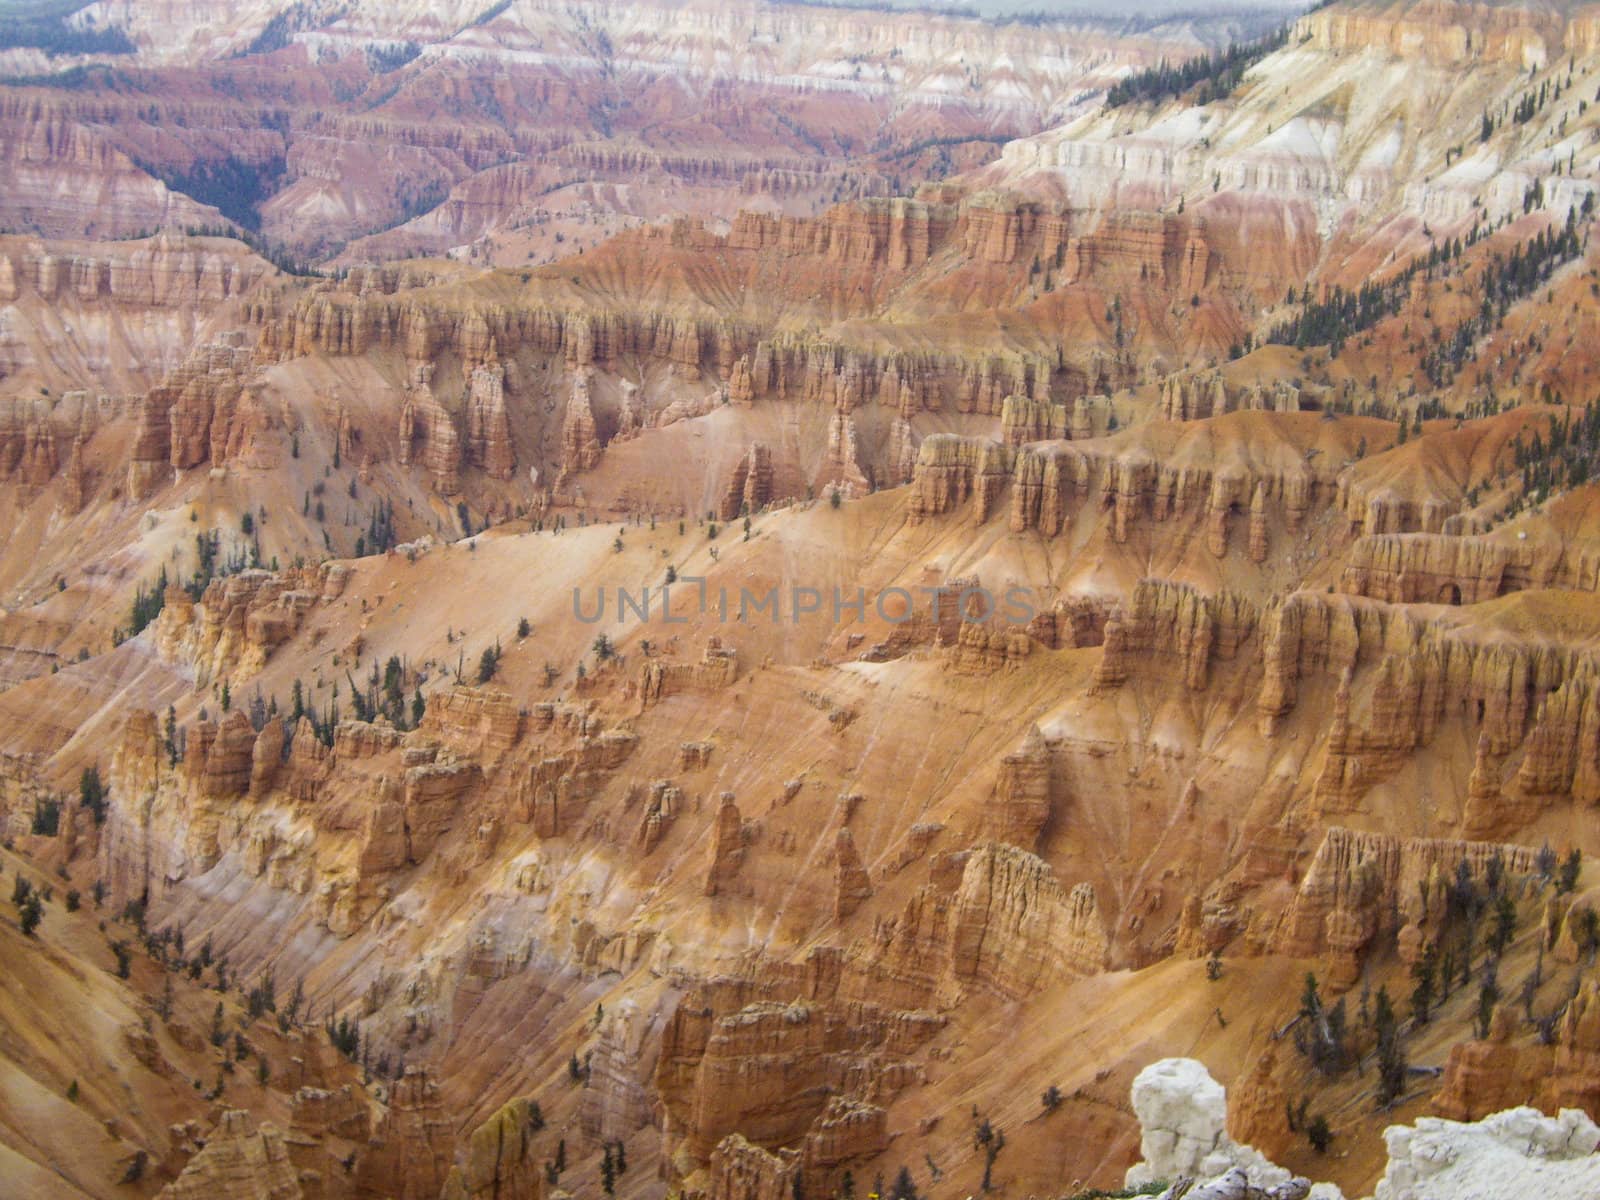 At the rim of Cedar Breaks National Monument by emattil